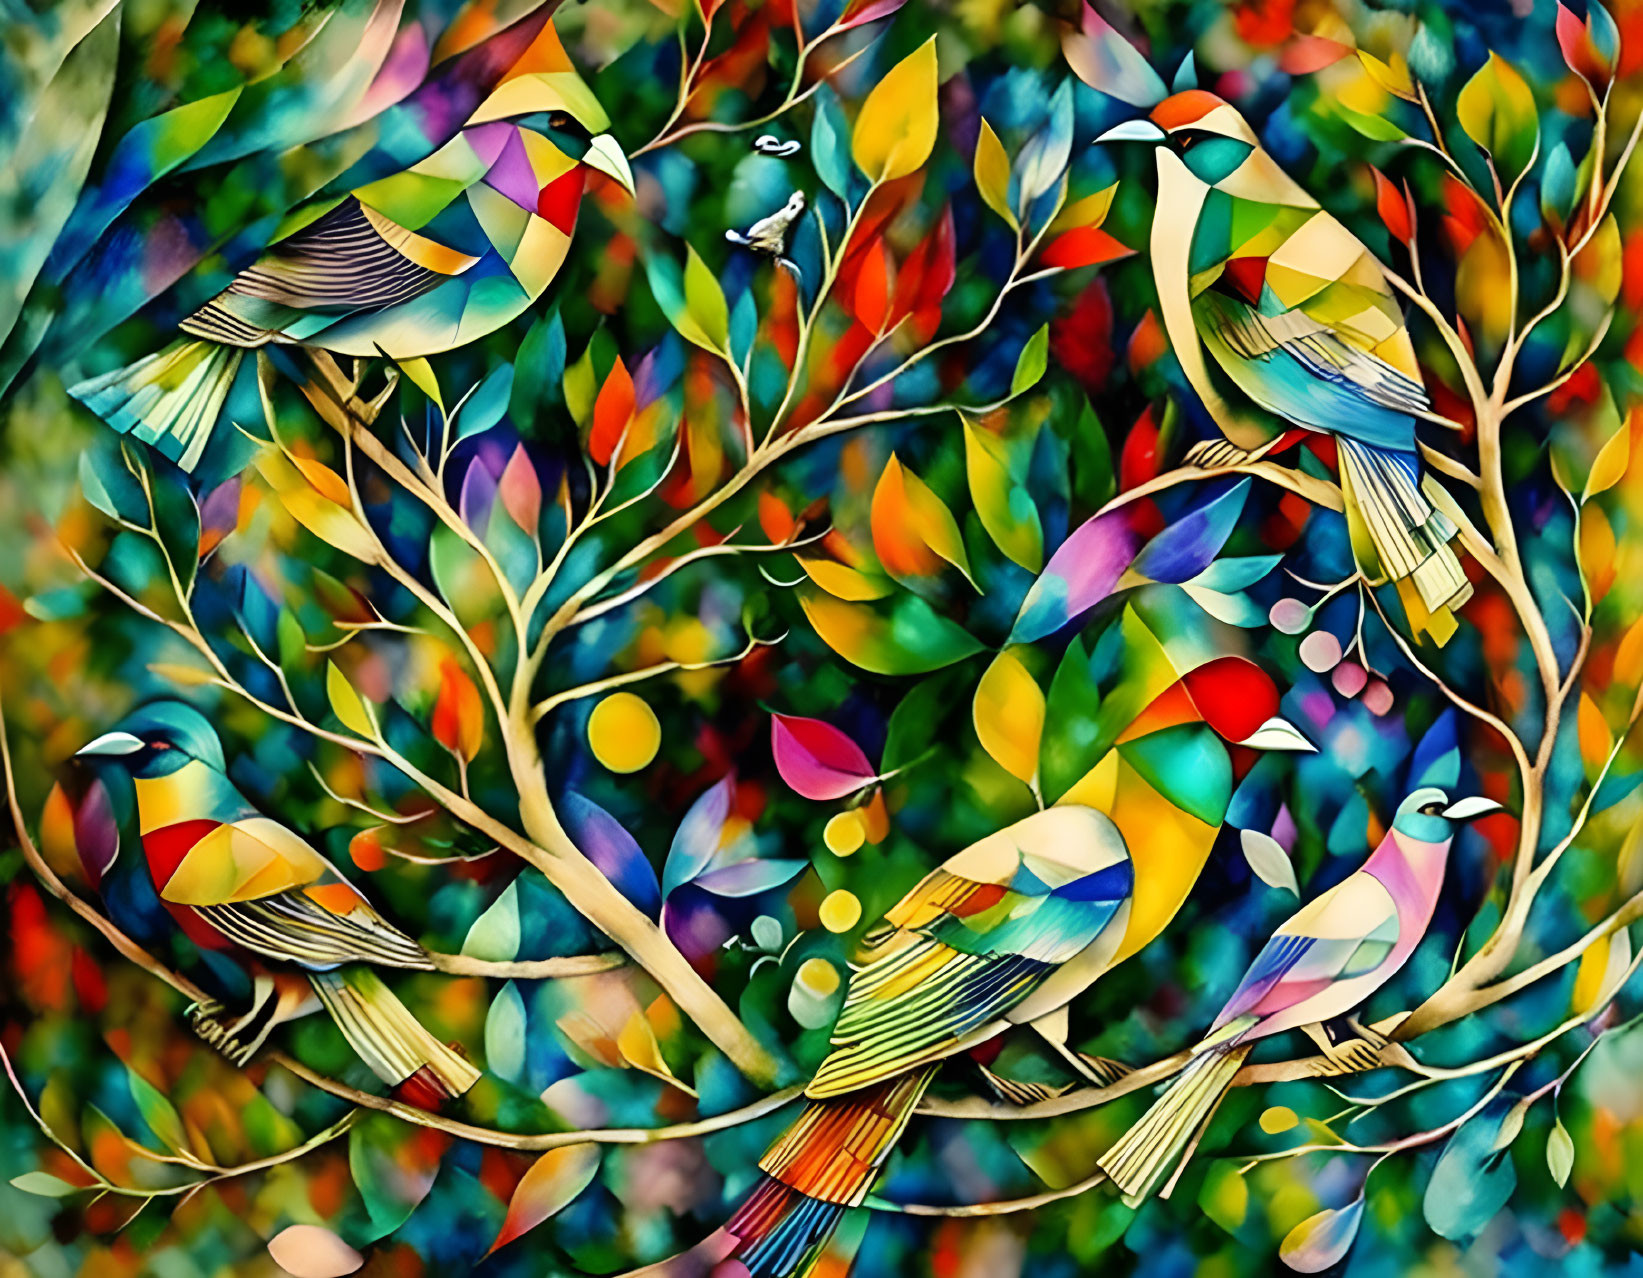 Colorful Painting of Stylized Birds on Branches with Abstract Leaves